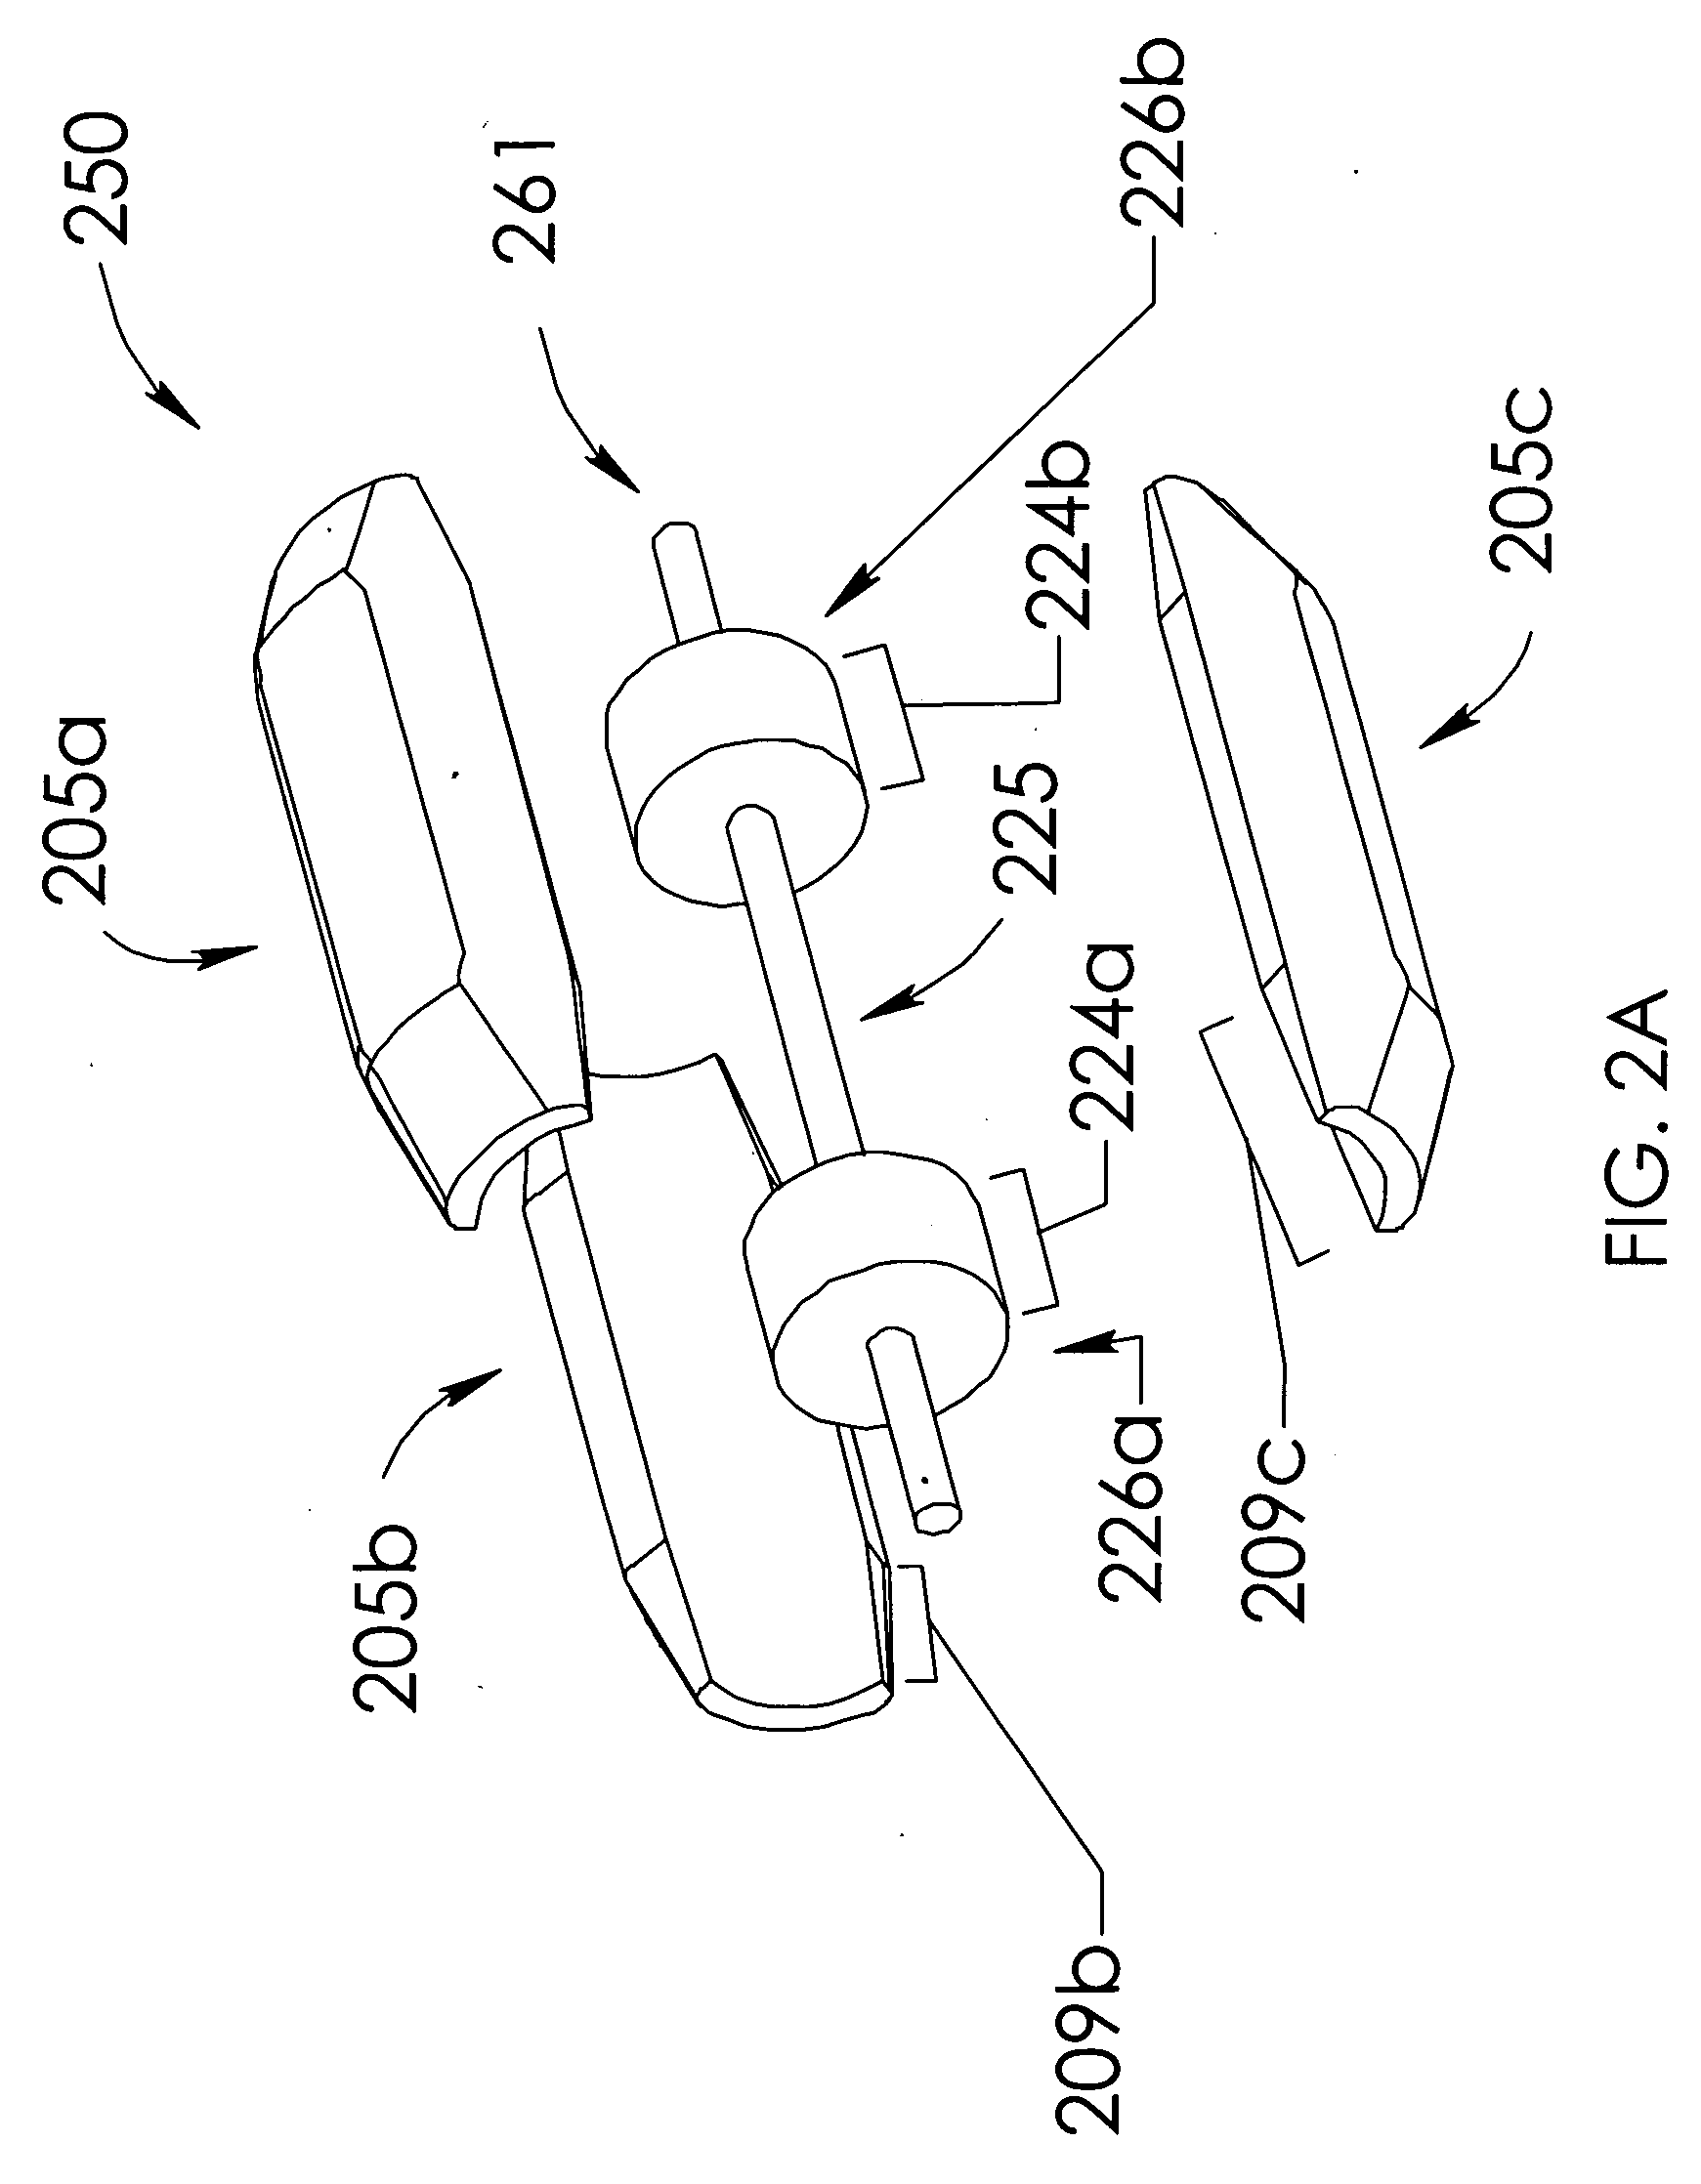 Rotor-stator structure for electrodynamic machines